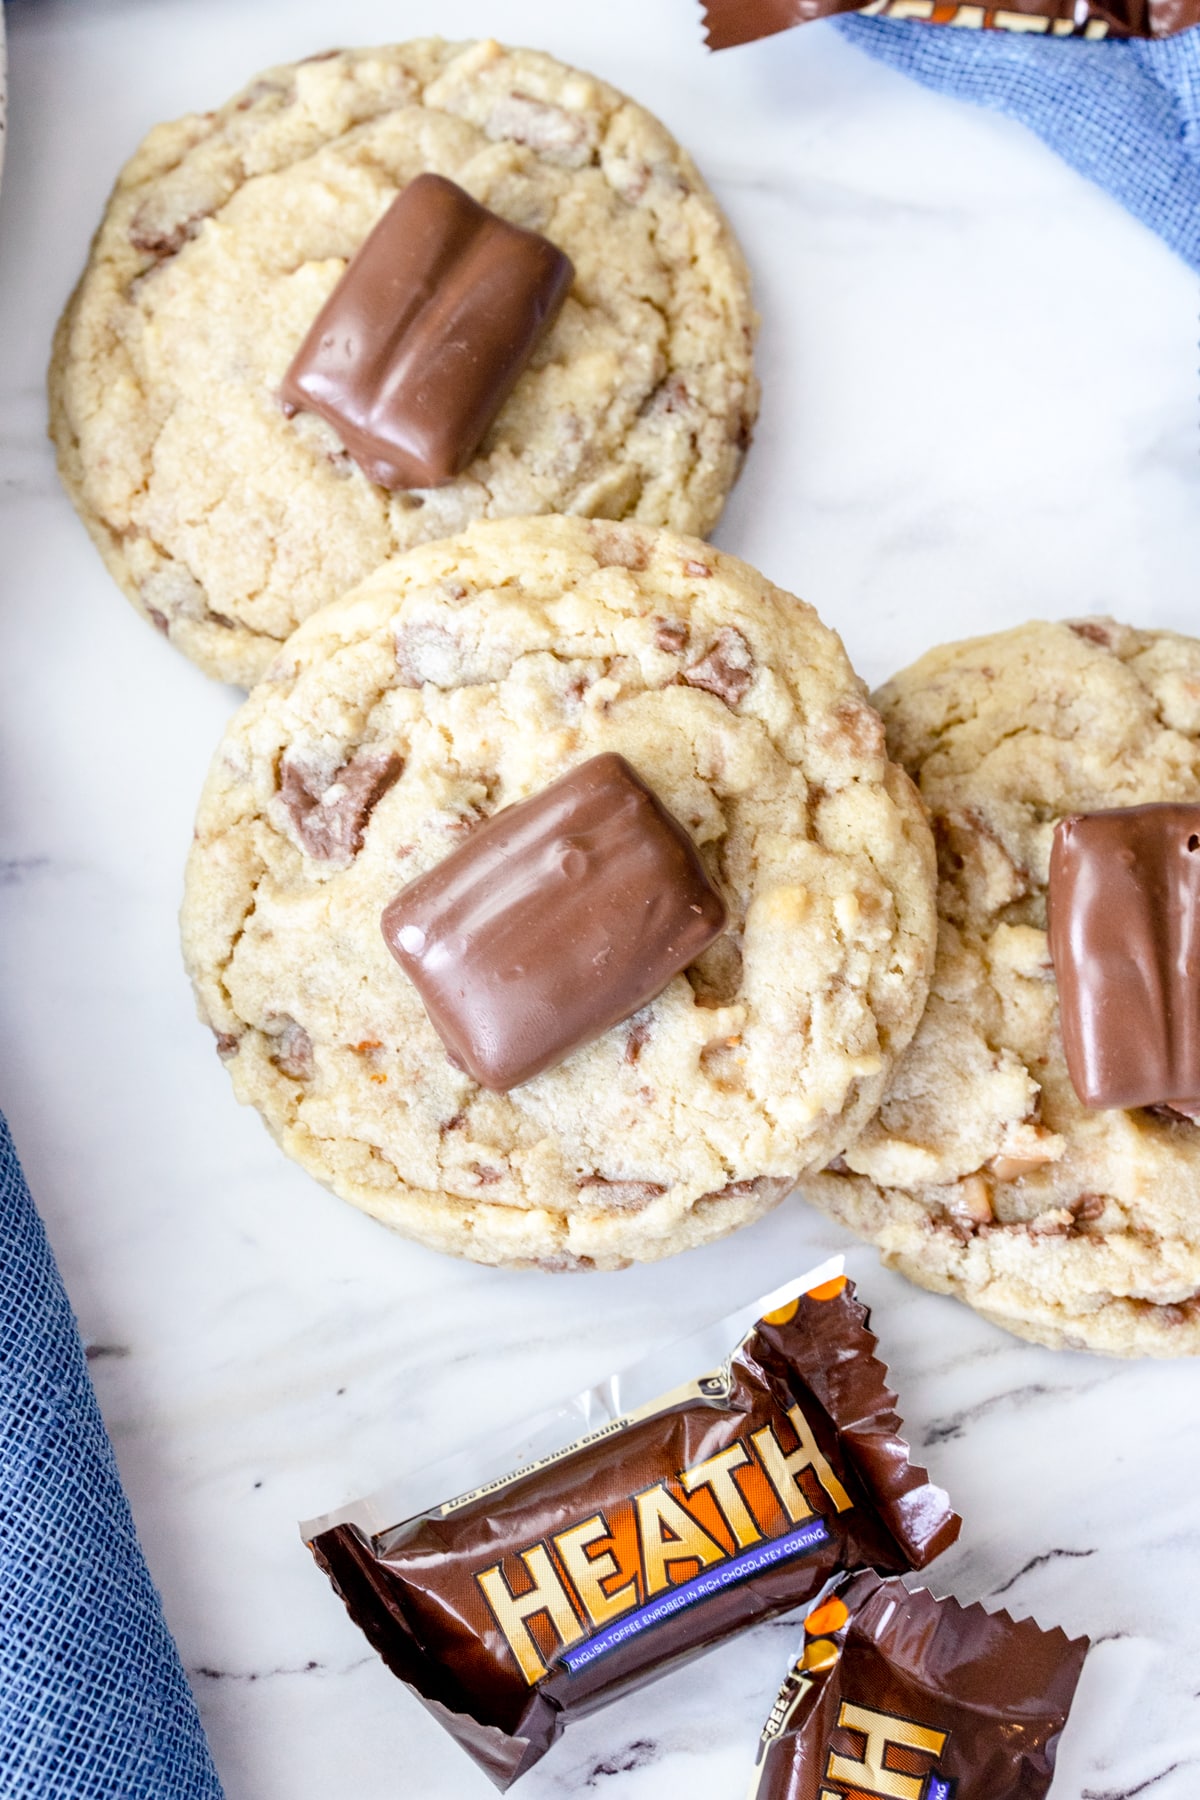 Top view of Heath Bar Cookies on a plate with heath bar candies in wrappers next to them.